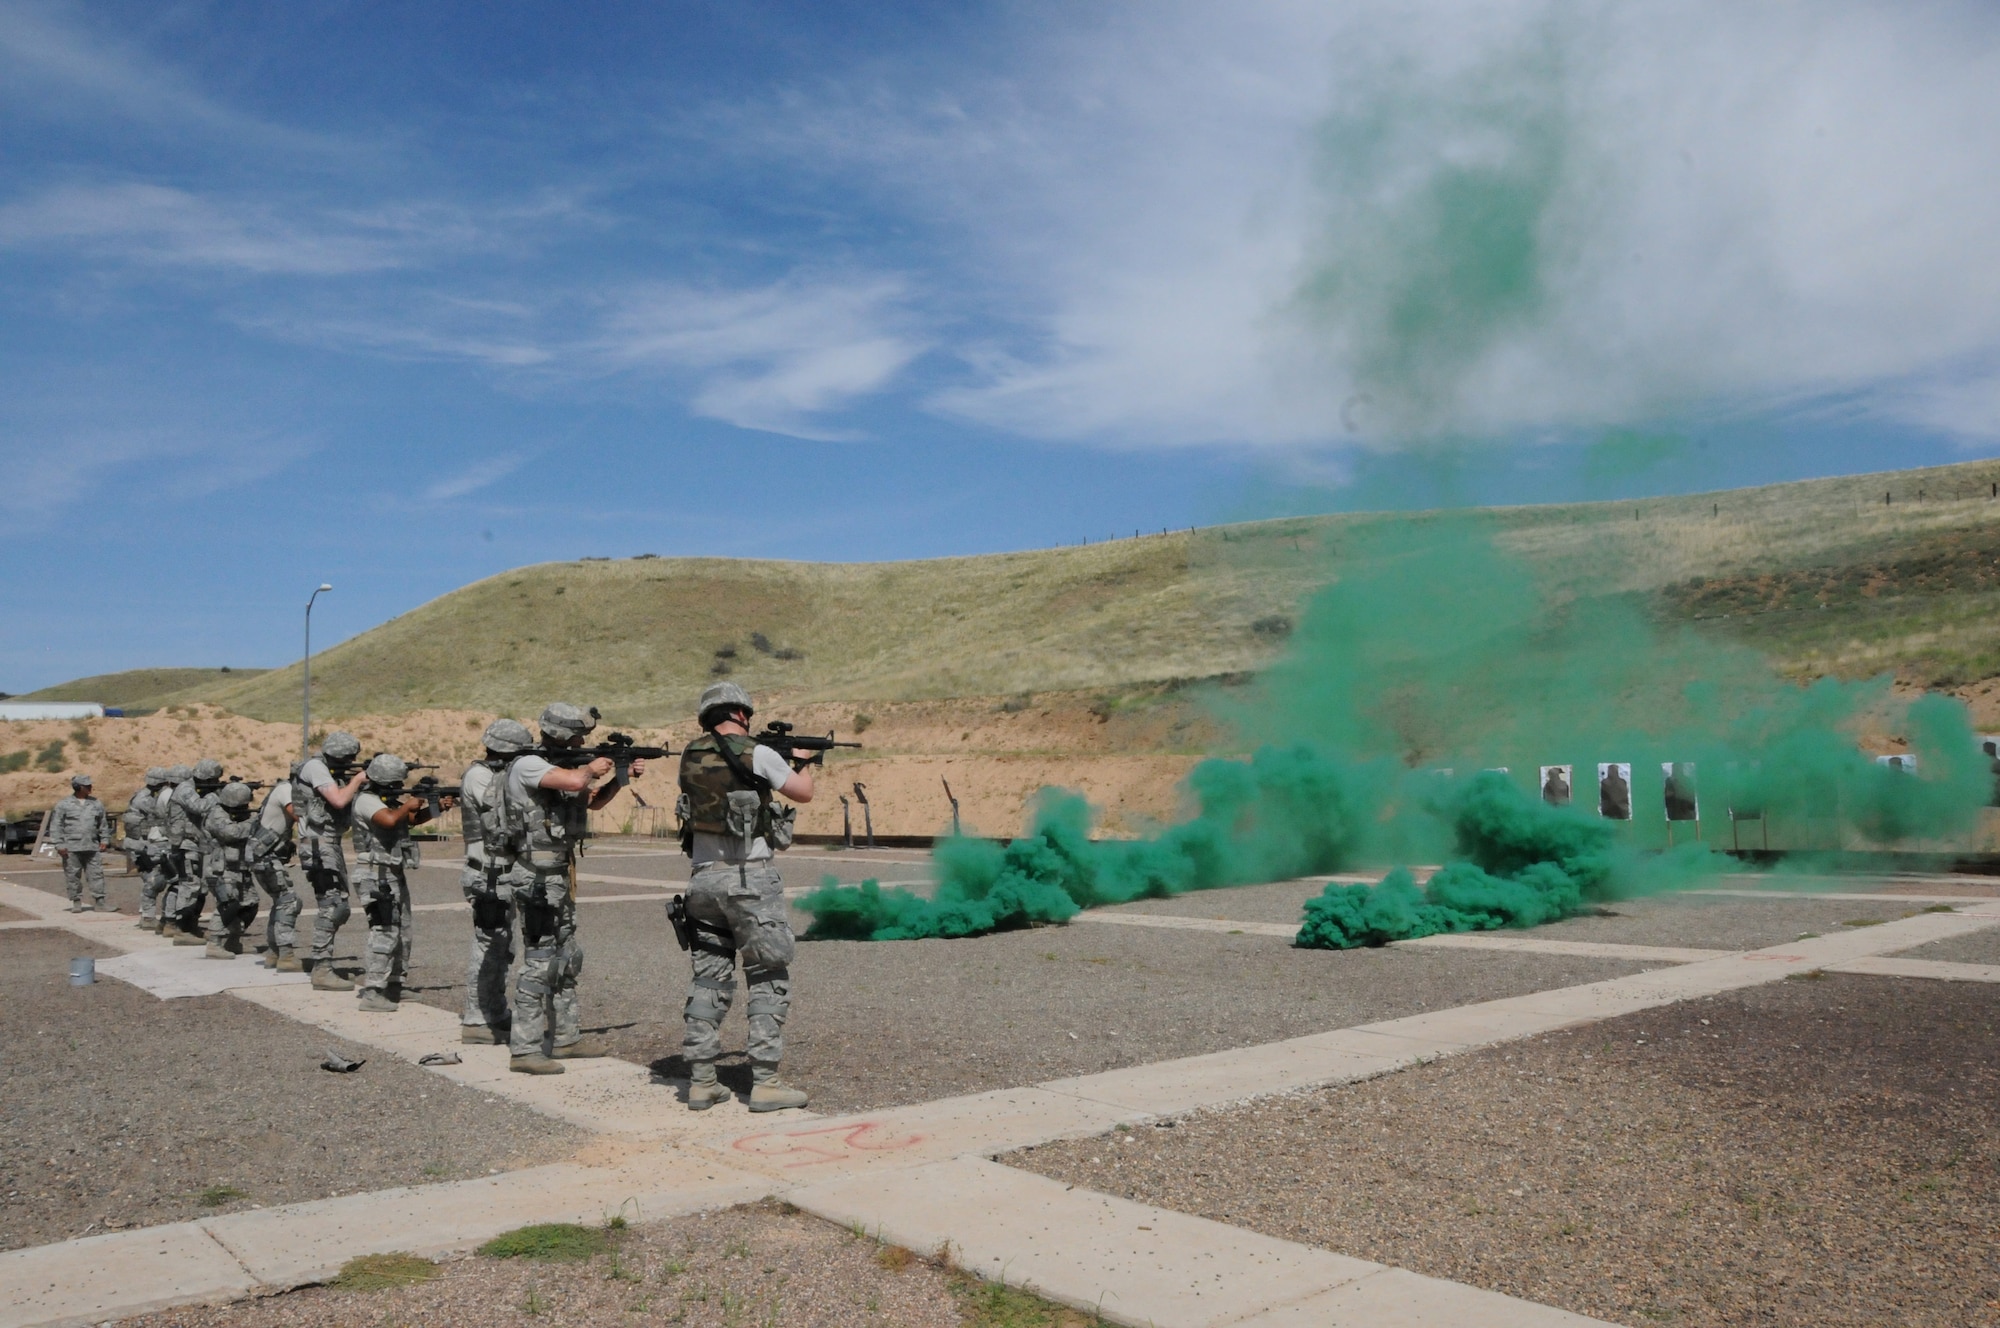 U.S. Airmen with the 161st Security Forces Squadron, Arizona Air National Guard, practice various weapons firing drills and scenarios at the Prescott Valley SWAT training grounds, Prescott Valley, Ariz., Aug. 3, 2013. The Airmen are preparing for an upcoming deployment with training focused on weapons firing, building entry and self-aid buddy care. (U.S. Air National Guard photo by Tech. Sgt. Susan Gladstein/Released)